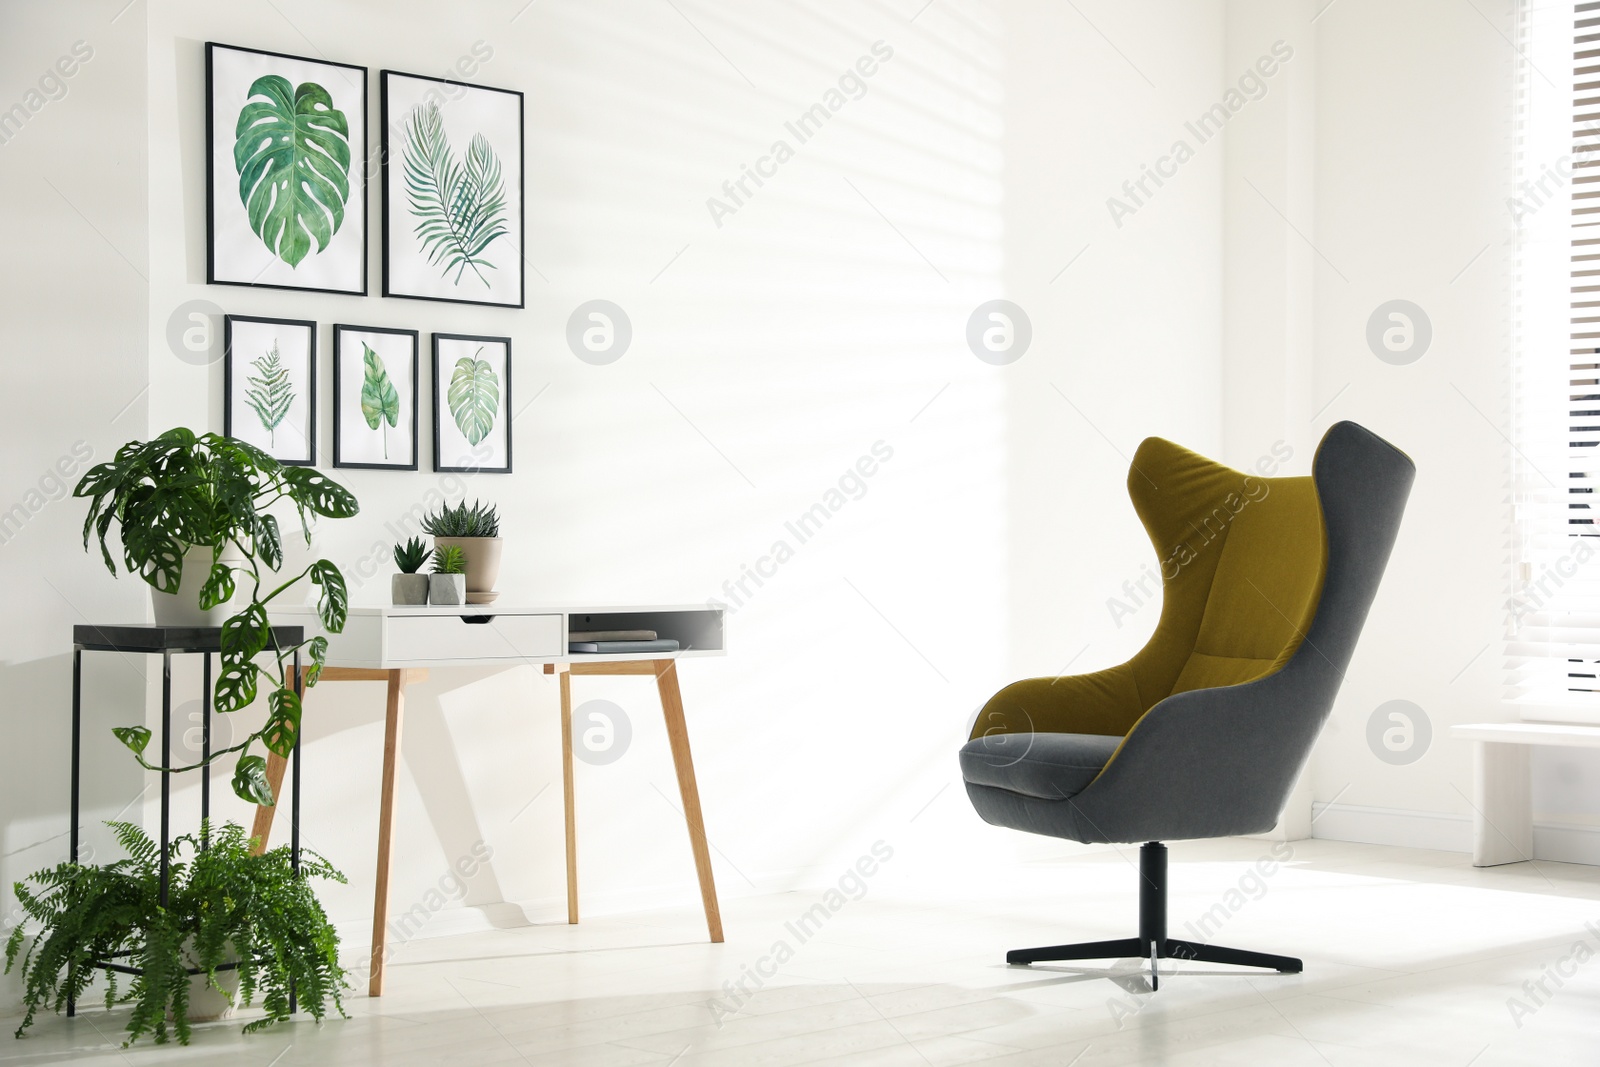 Photo of Stylish room interior with comfortable armchair and paintings of tropical leaves